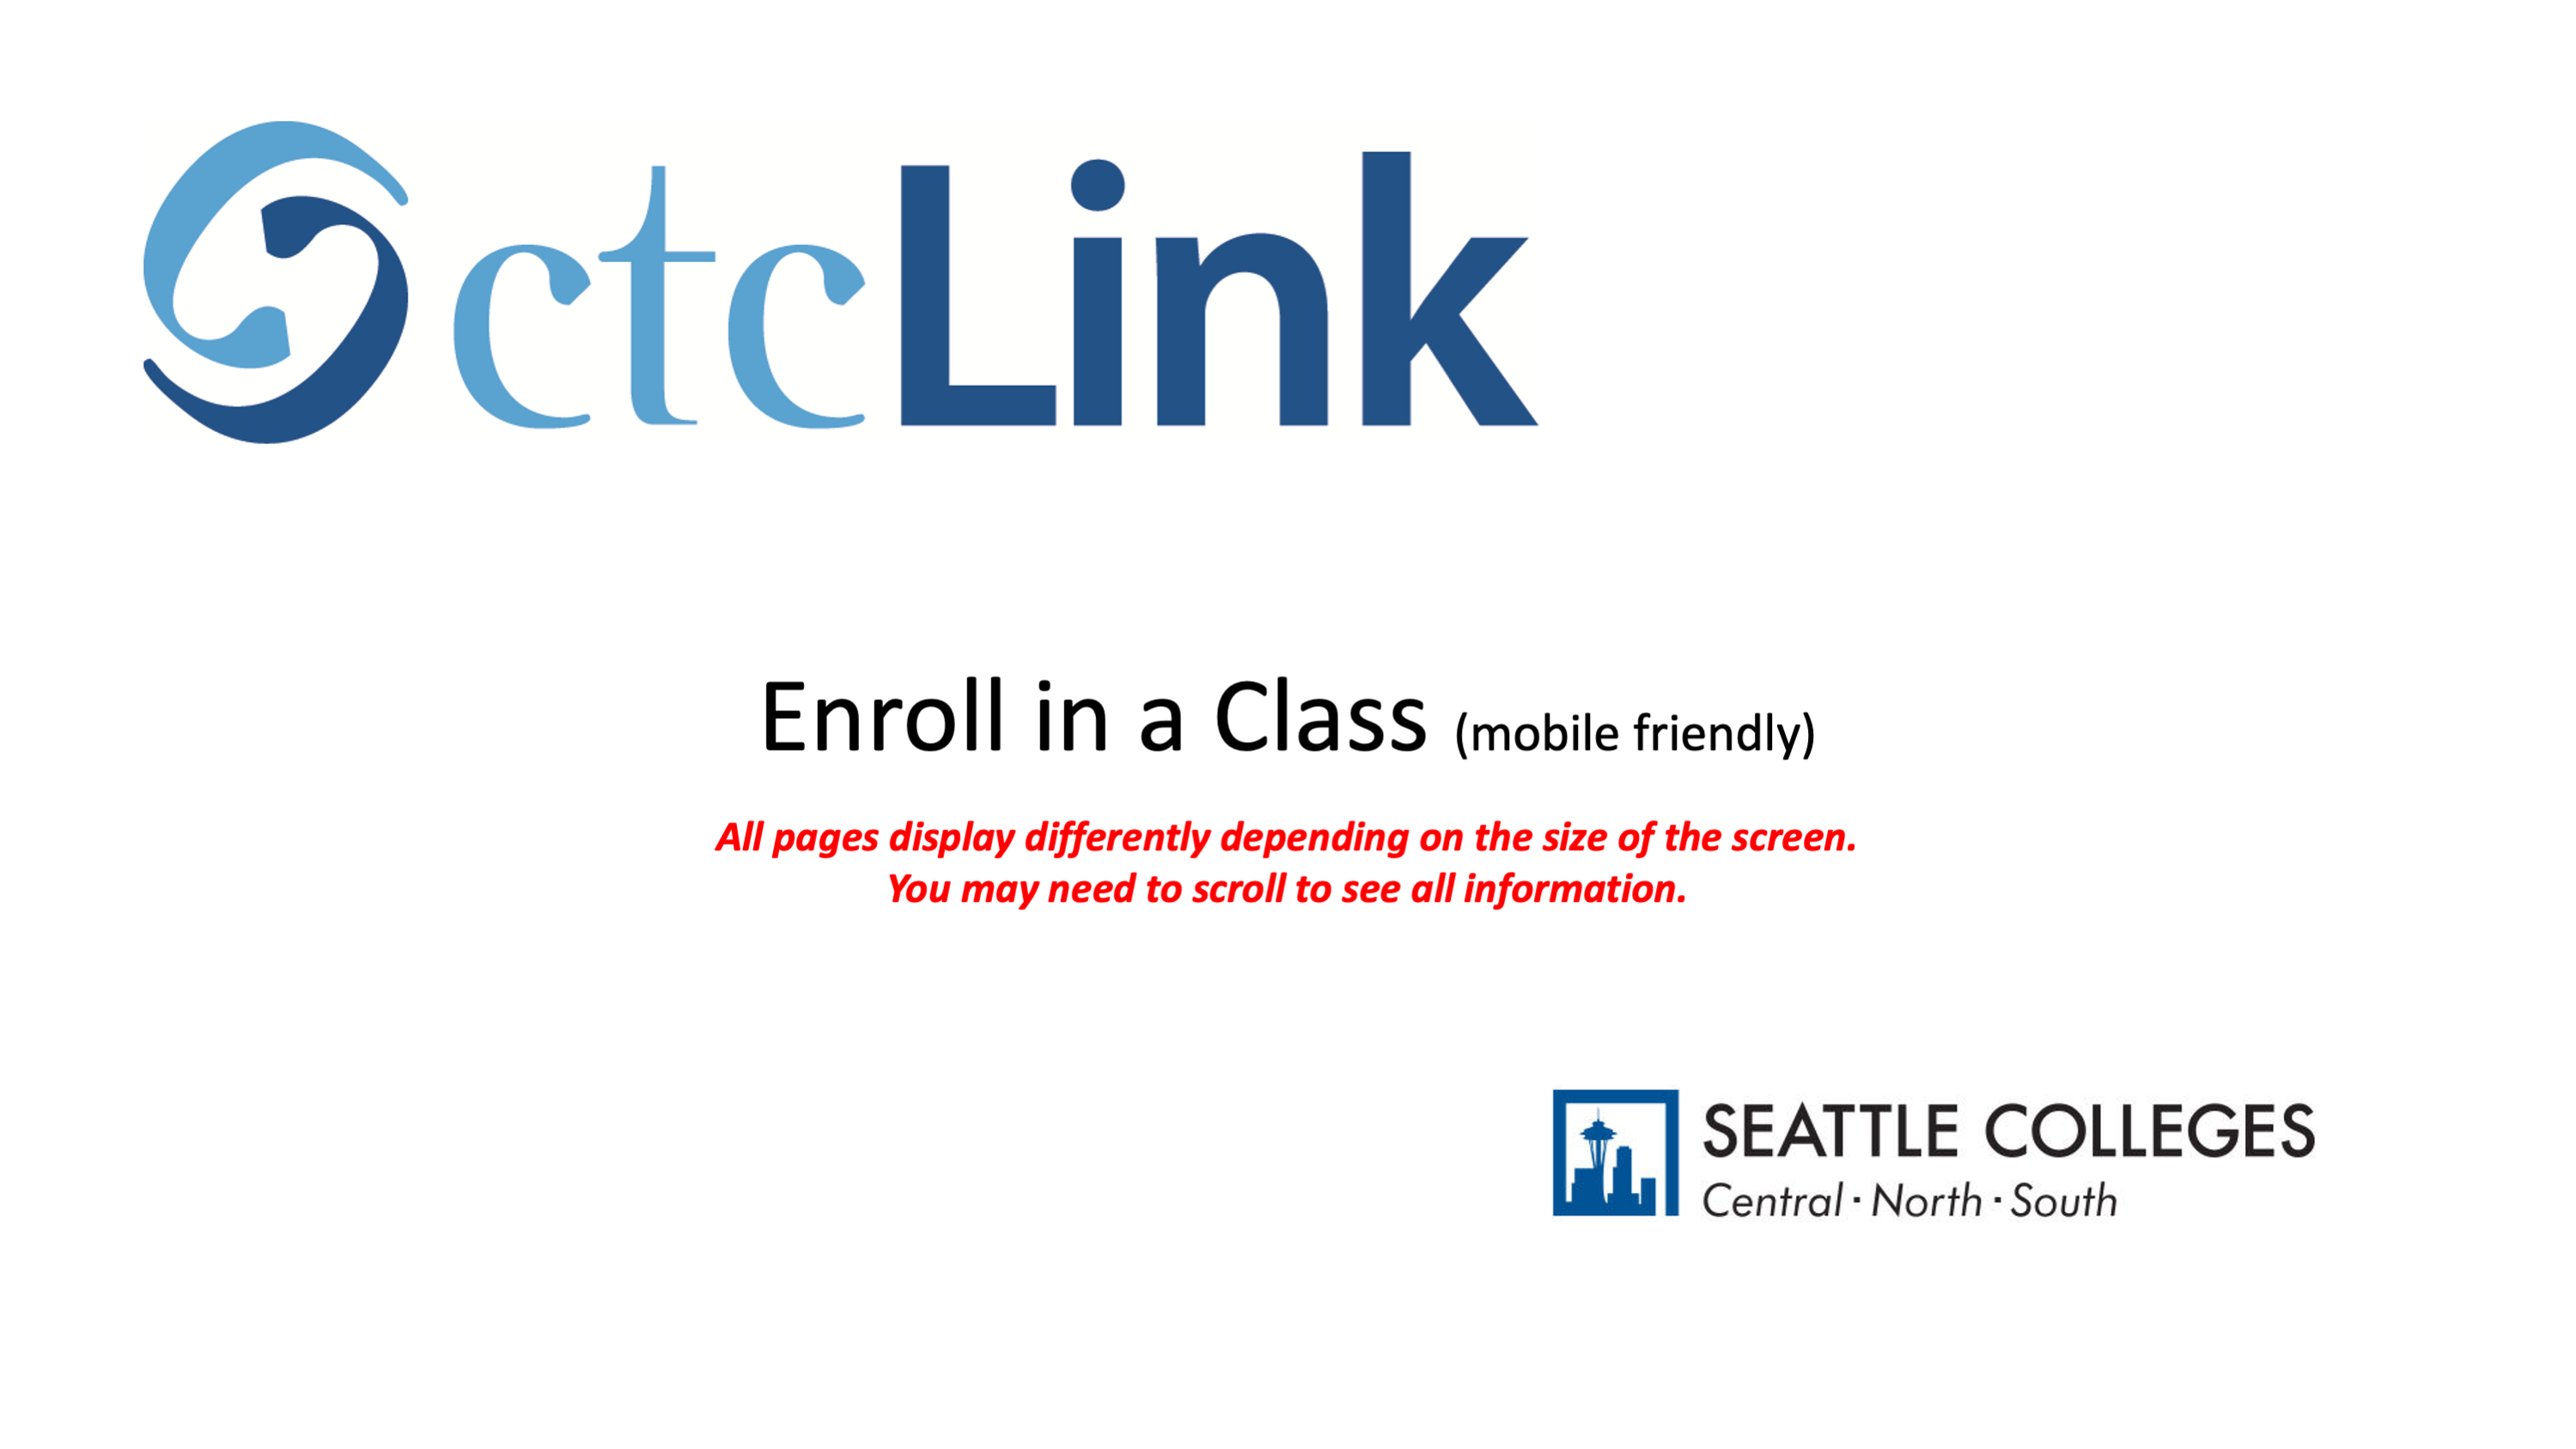 Enroll in a Class (mobile friendly) All pages display differently depending on the size of the screen. You may need to scroll to see all information.